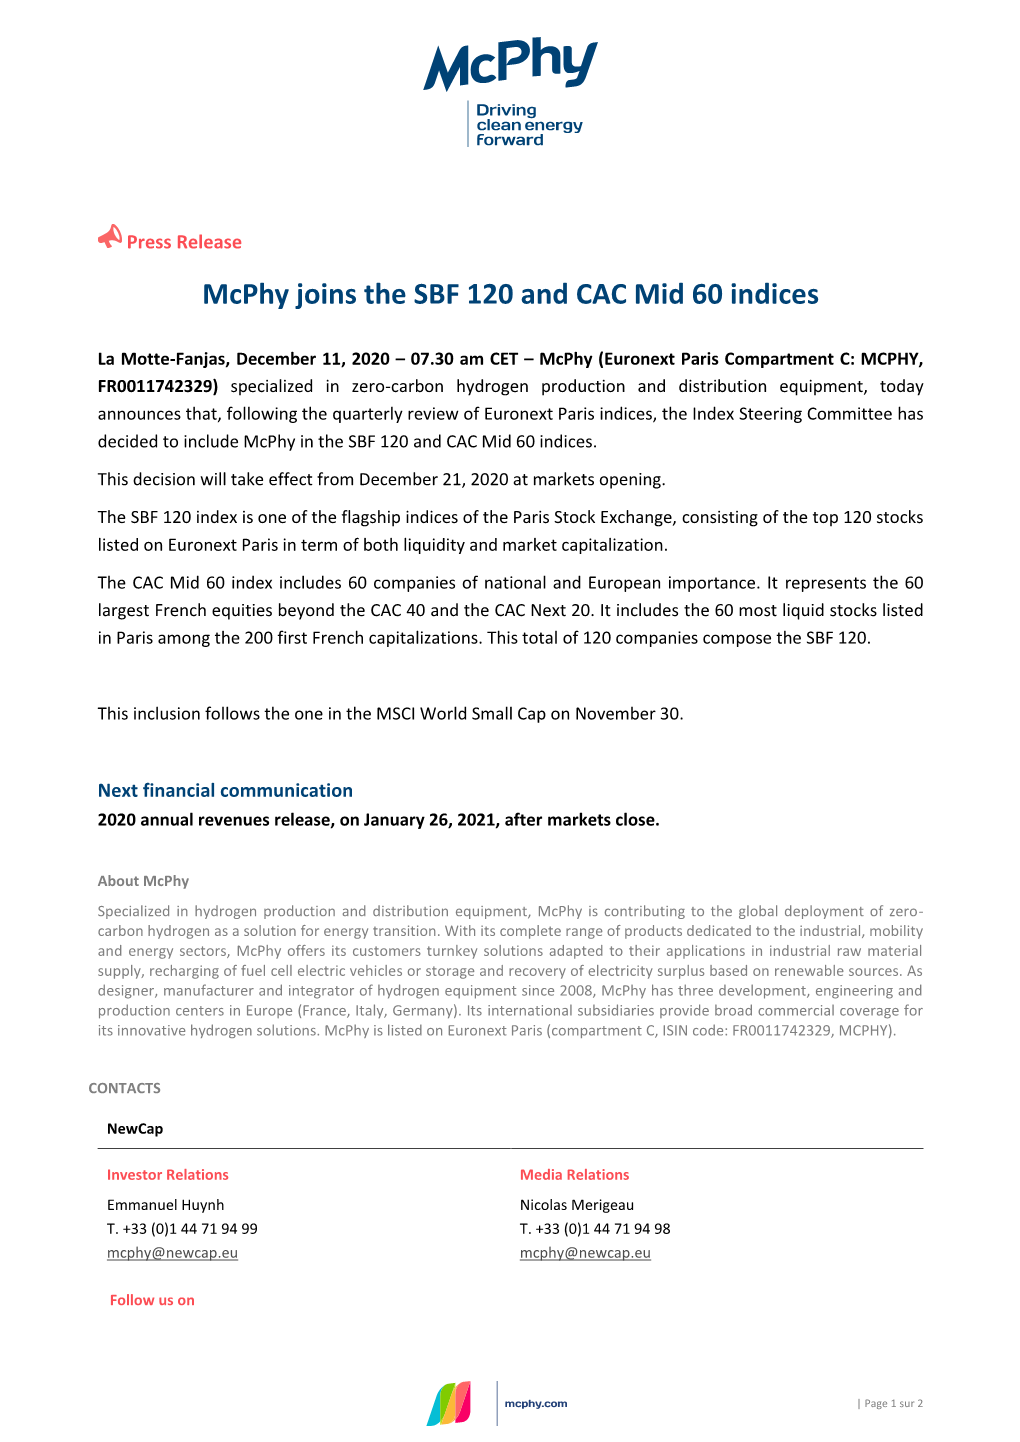 Mcphy Joins the SBF 120 and CAC Mid 60 Indices